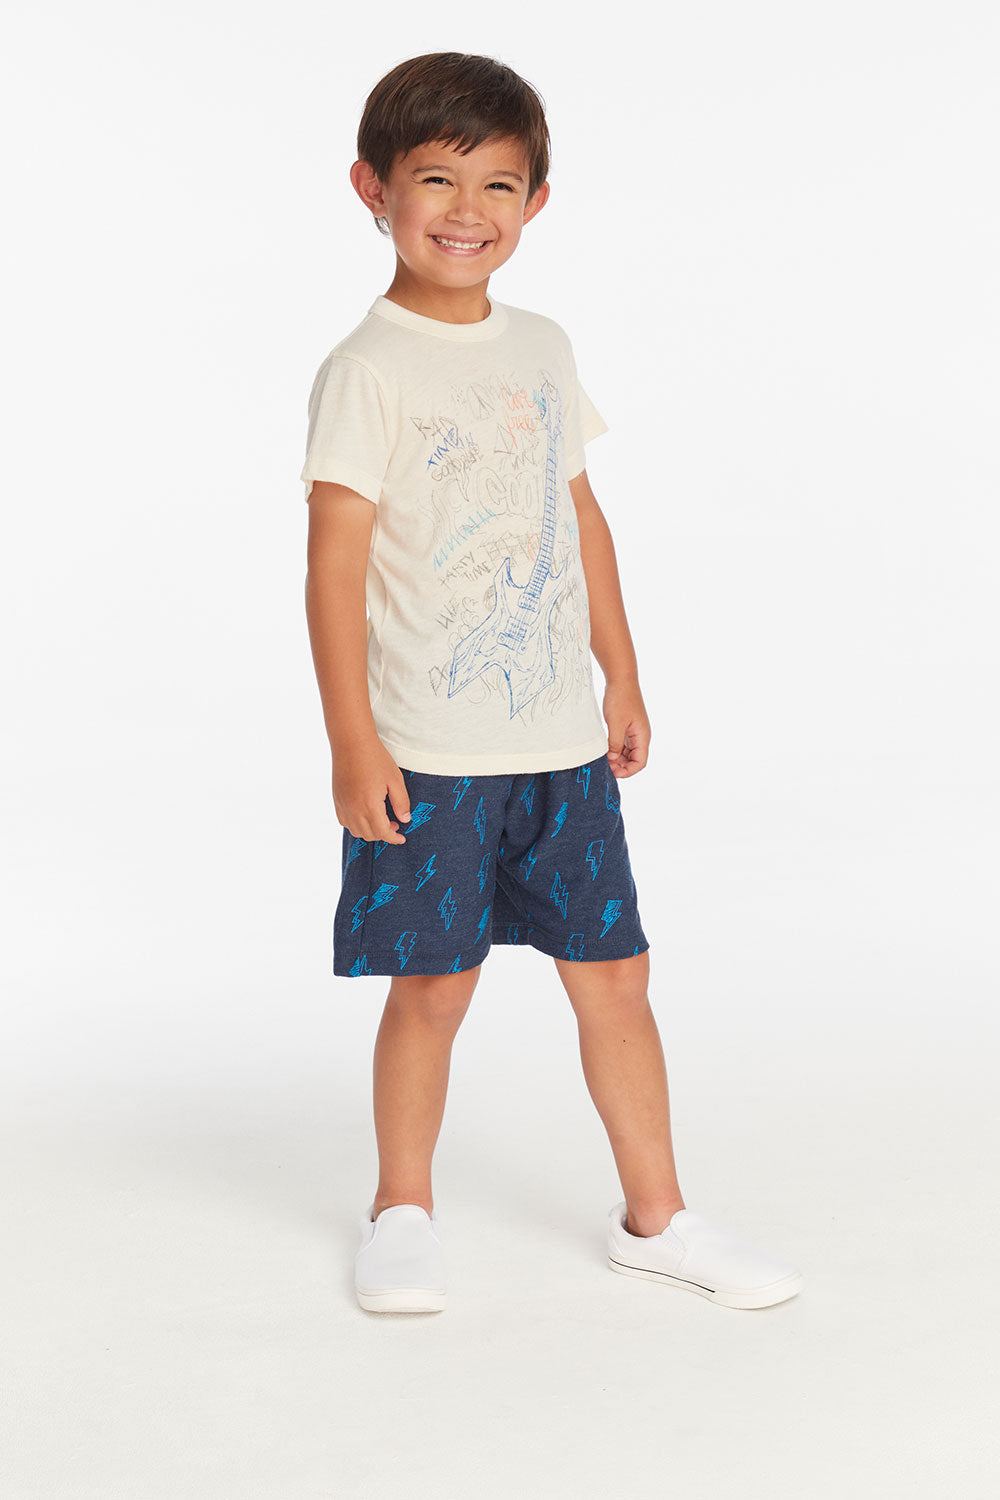 Doodle Rock'n'Roll Boys Tee Boys chaserbrand